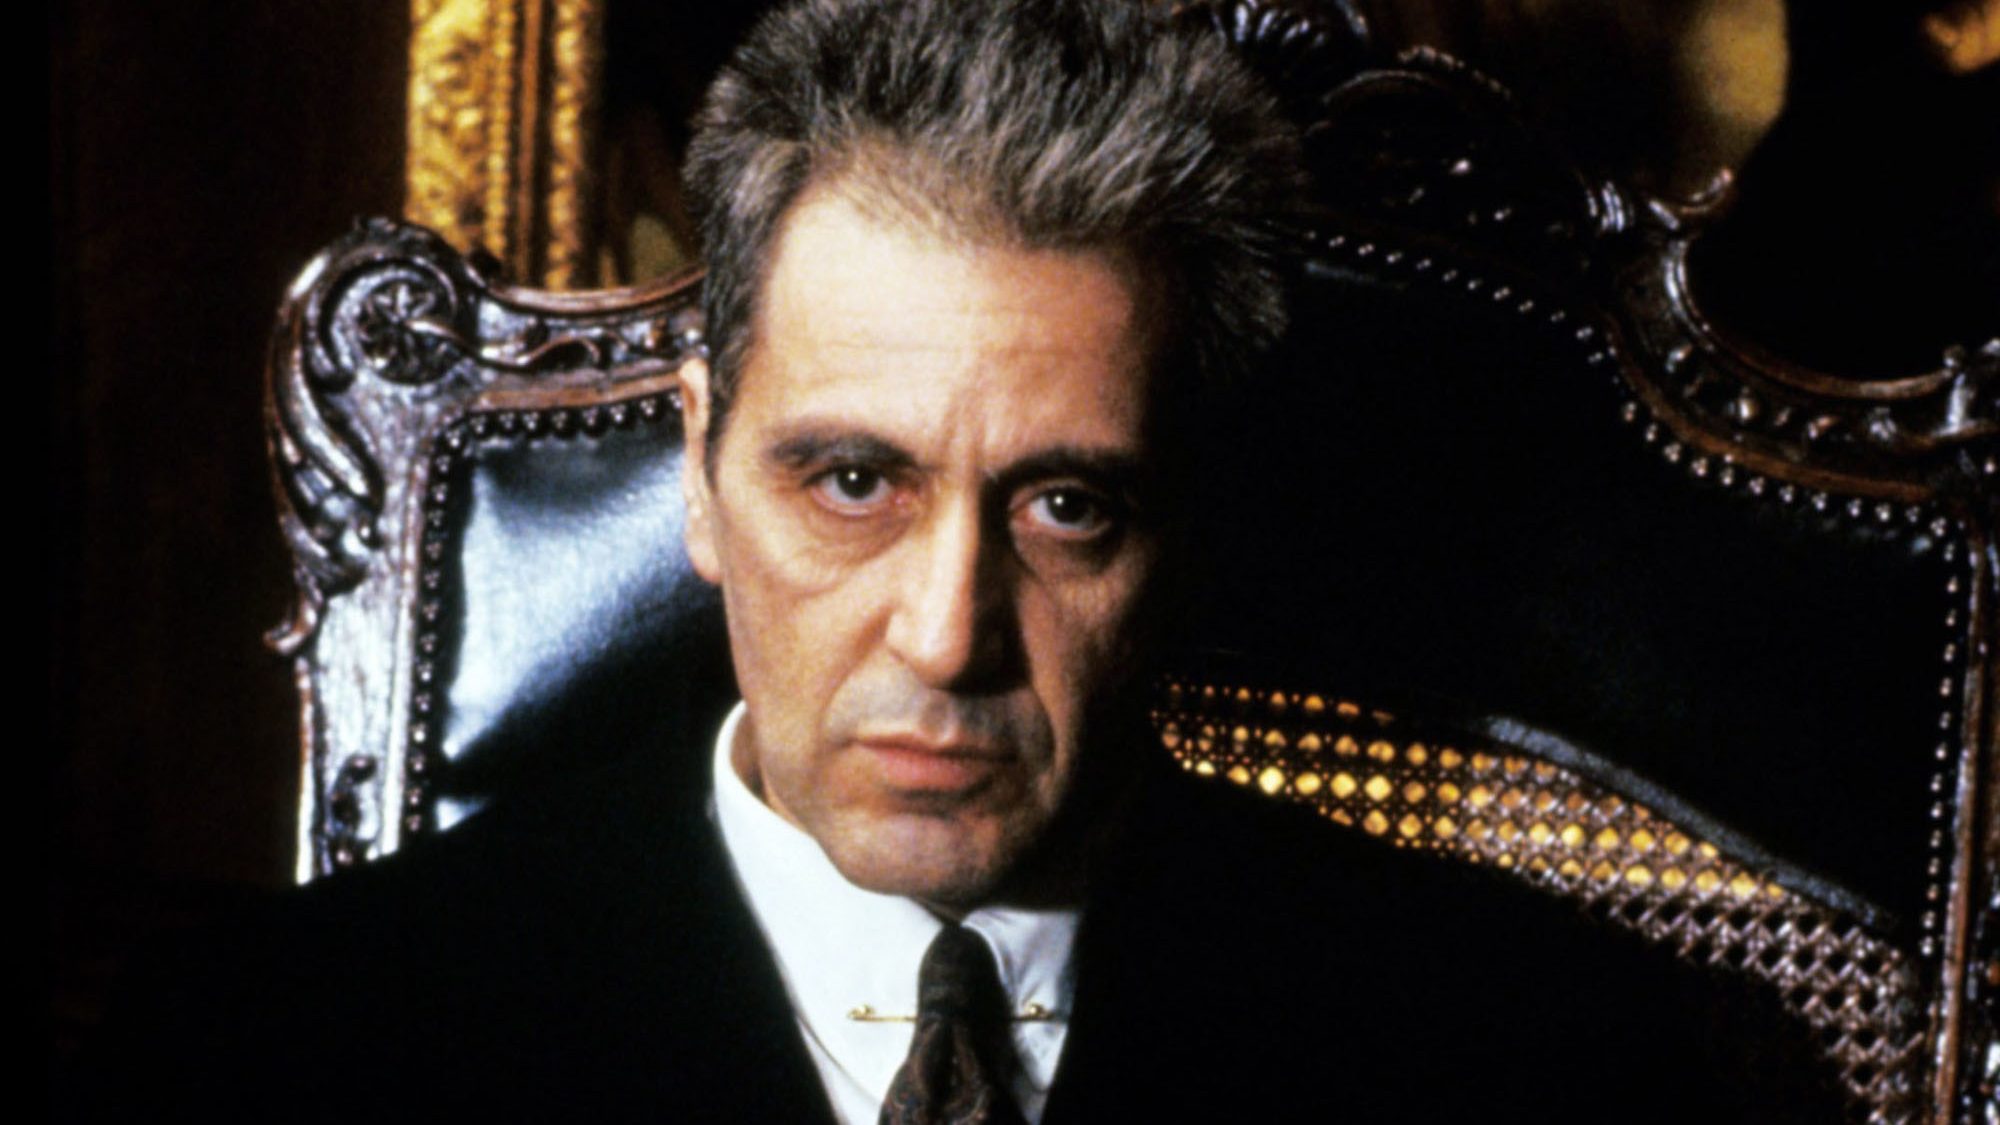 Where to watch the Godfather 3 for free